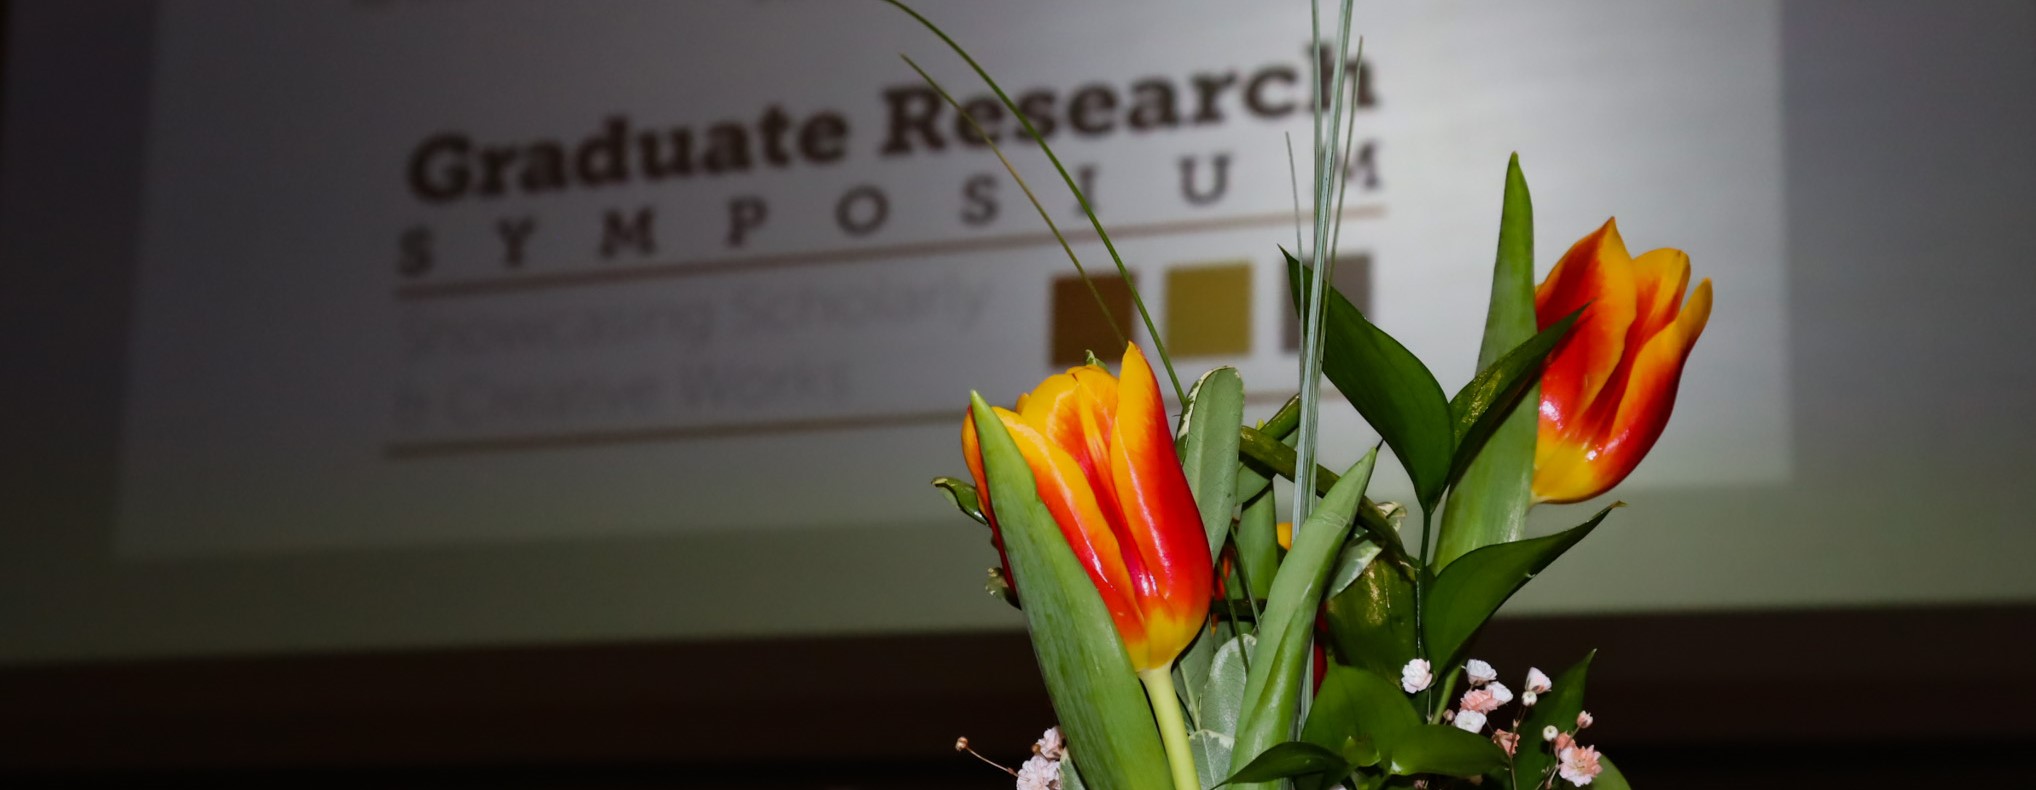 A vase of flowers sitting in front of the Graduate Research Symposium Logo on a screen